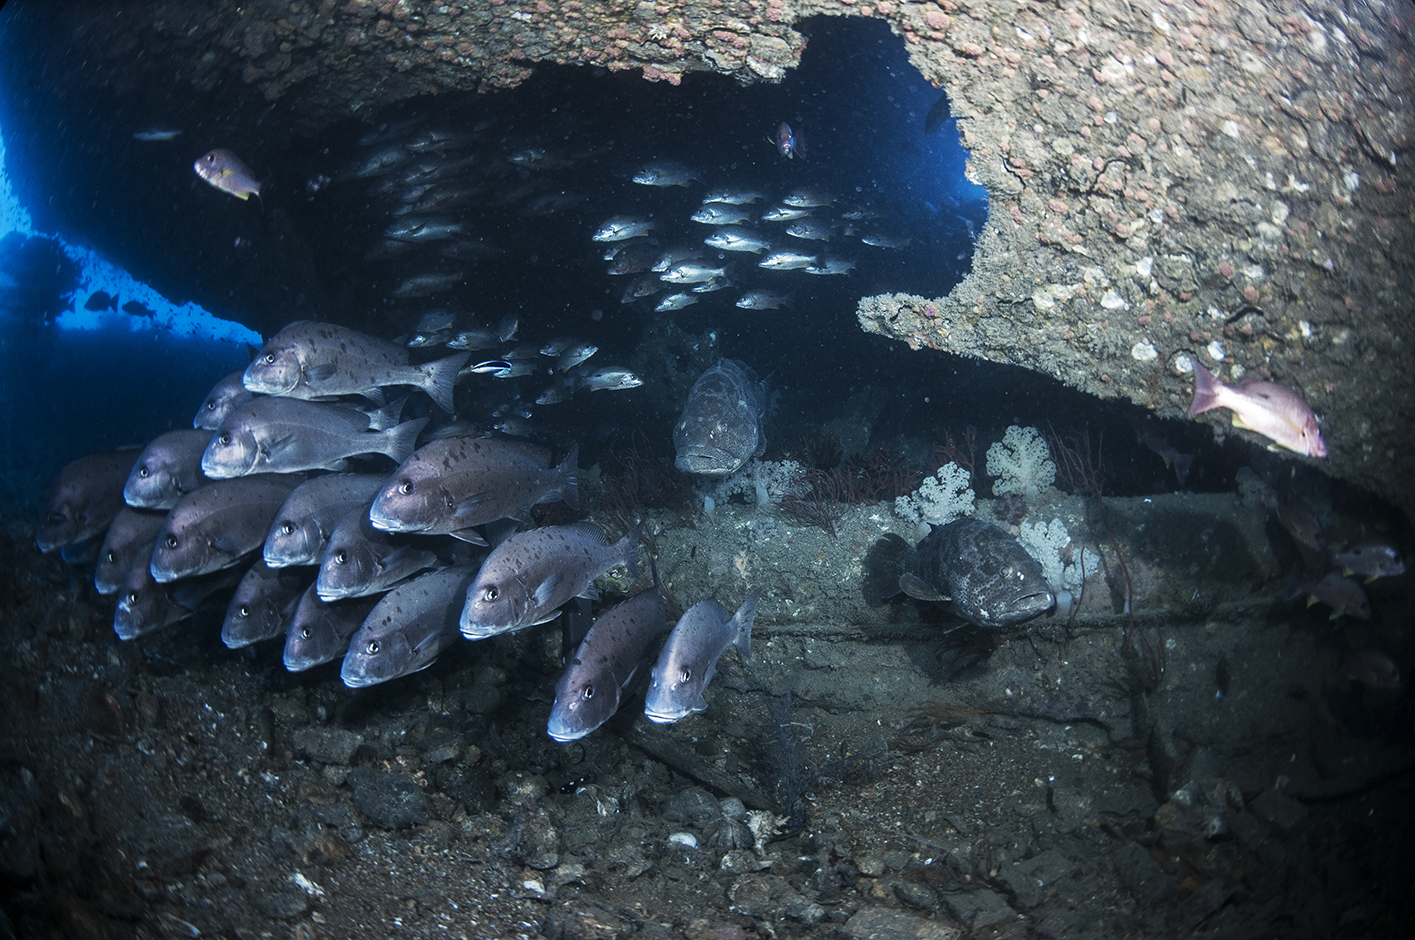 The Yongala shipwreck has one of the most active congregations of fish life seen by many divers